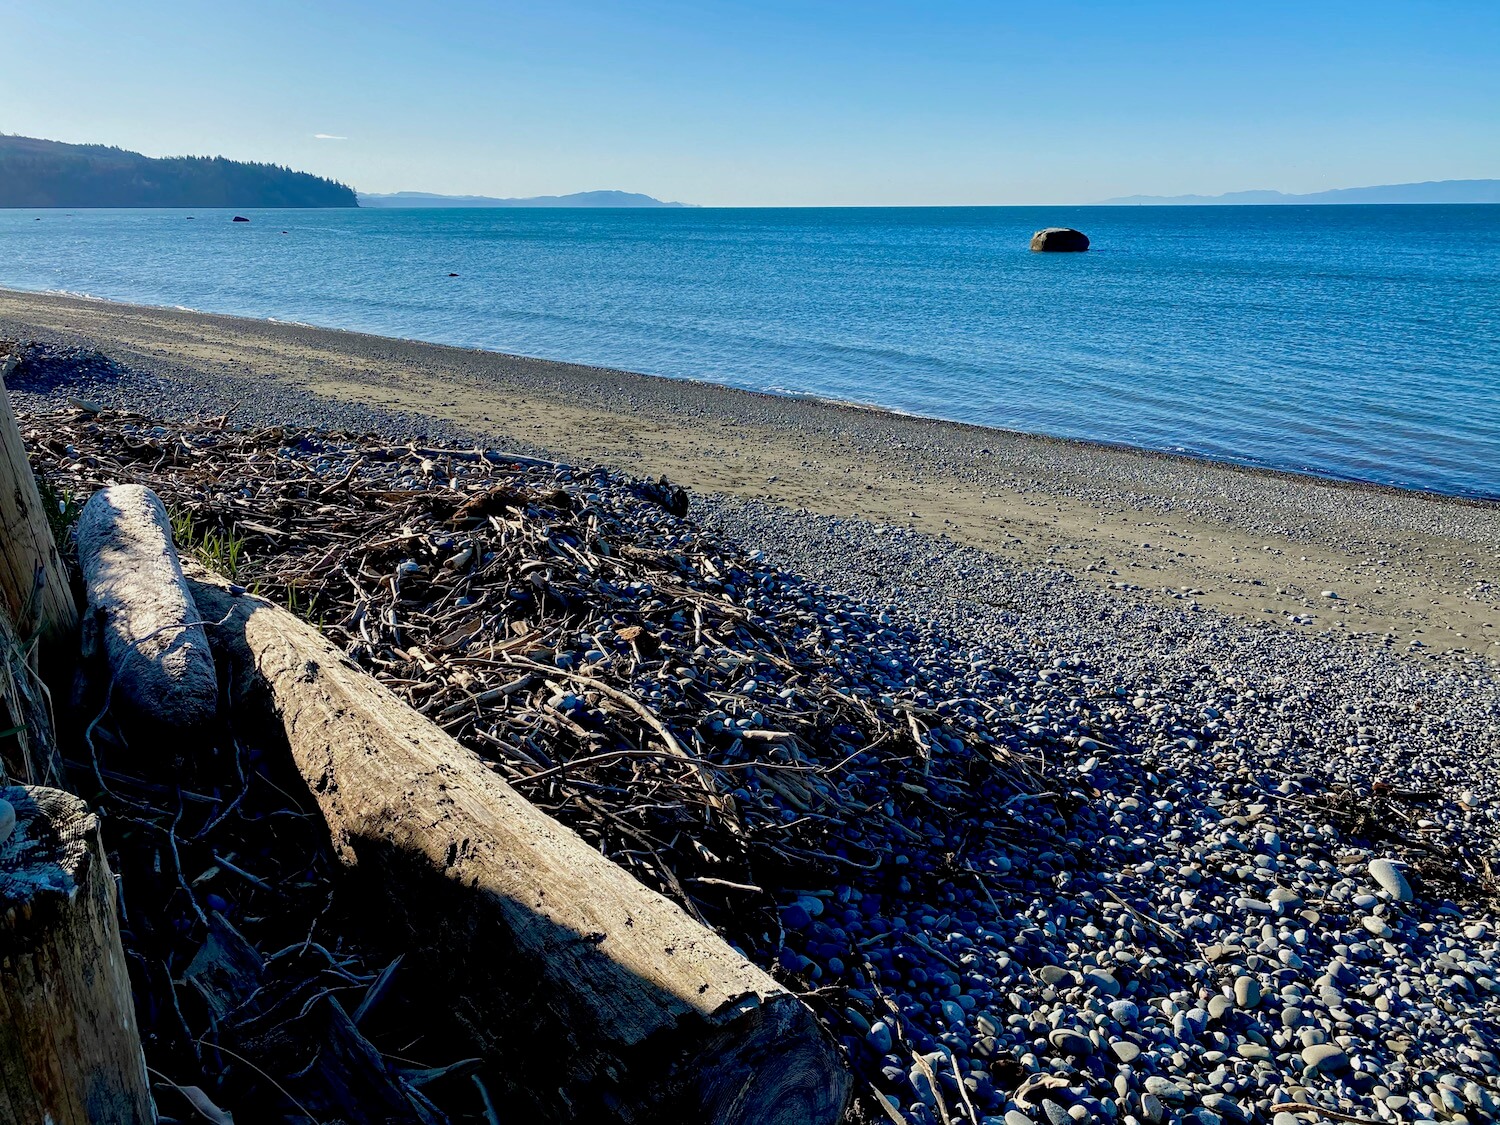 The view from charming Joyce Washington allows sights of both Vancouver Island in Canada and the tip of Washington State in this view of a pebbly beach with drift logs and sea debris leading to a peaceful blue body of water with slight ripples of waves.  The sky in the background is blue.  